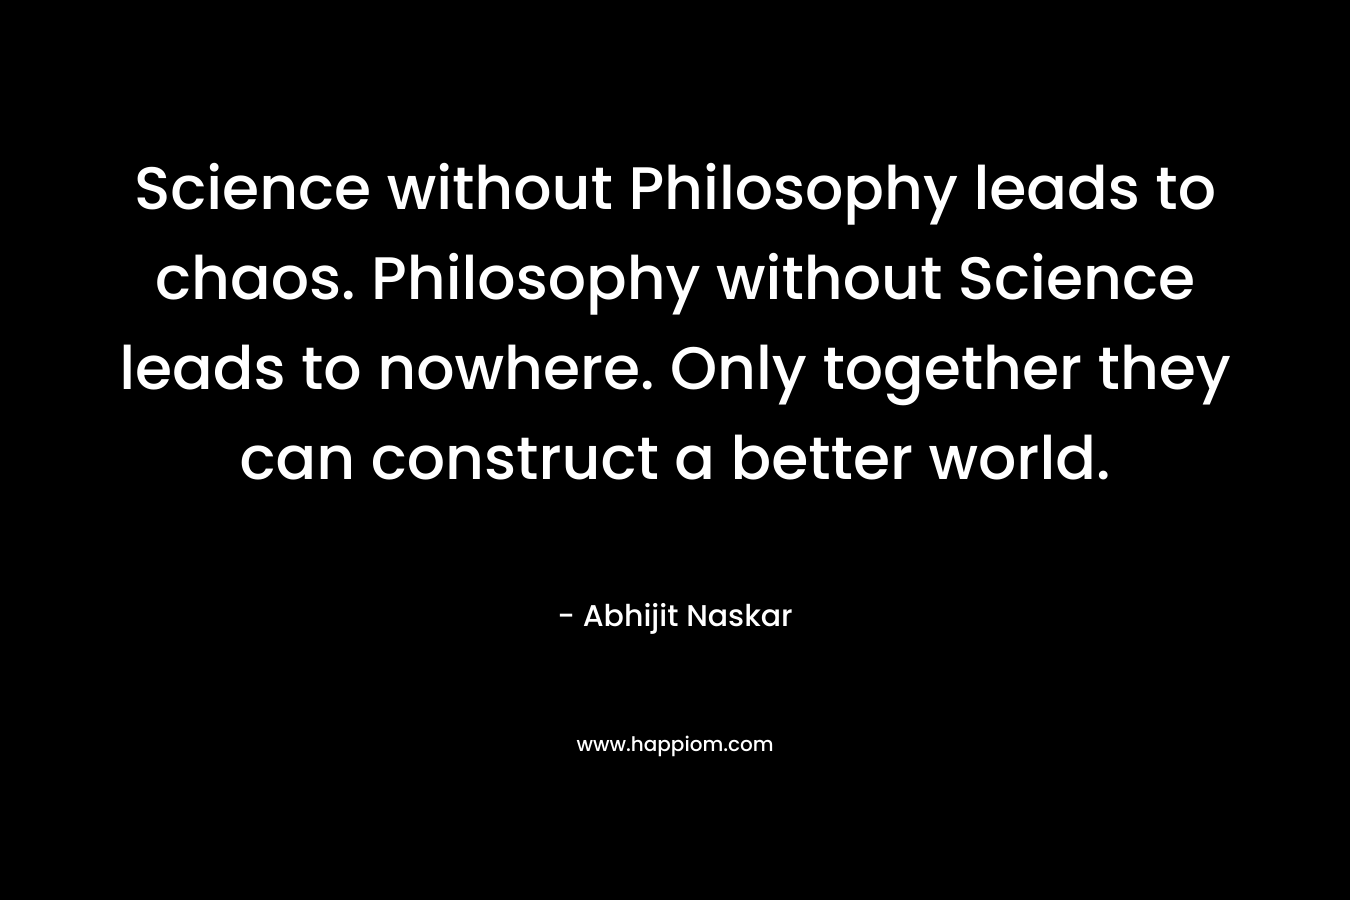 Science without Philosophy leads to chaos. Philosophy without Science leads to nowhere. Only together they can construct a better world.